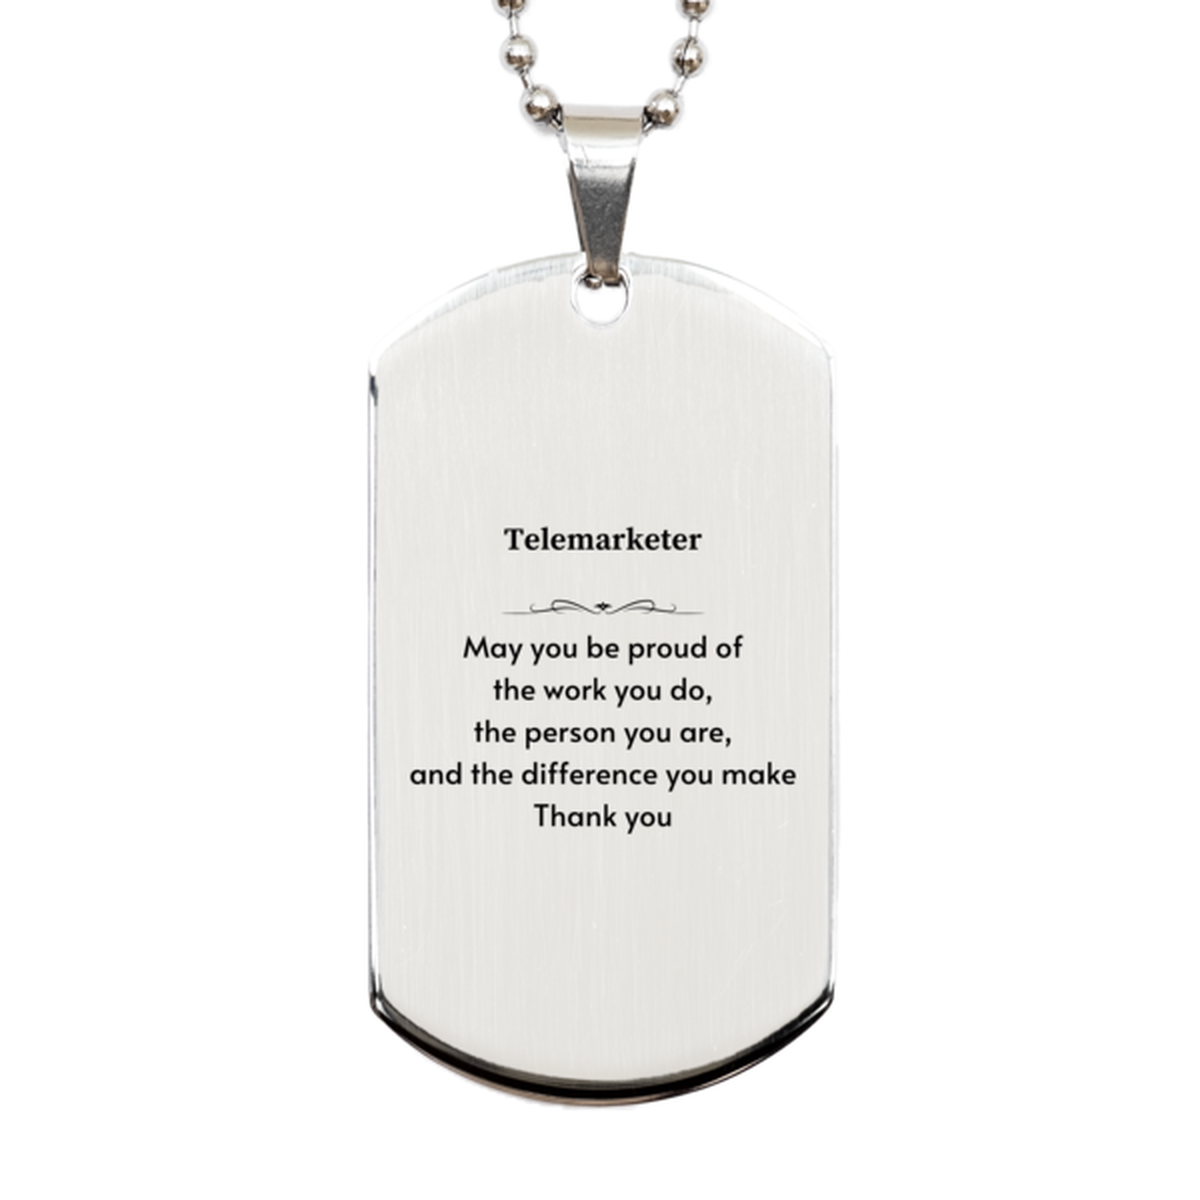 Heartwarming Silver Dog Tag Retirement Coworkers Gifts for Telemarketer, Telemarketer May You be proud of the work you do, the person you are Gifts for Boss Men Women Friends